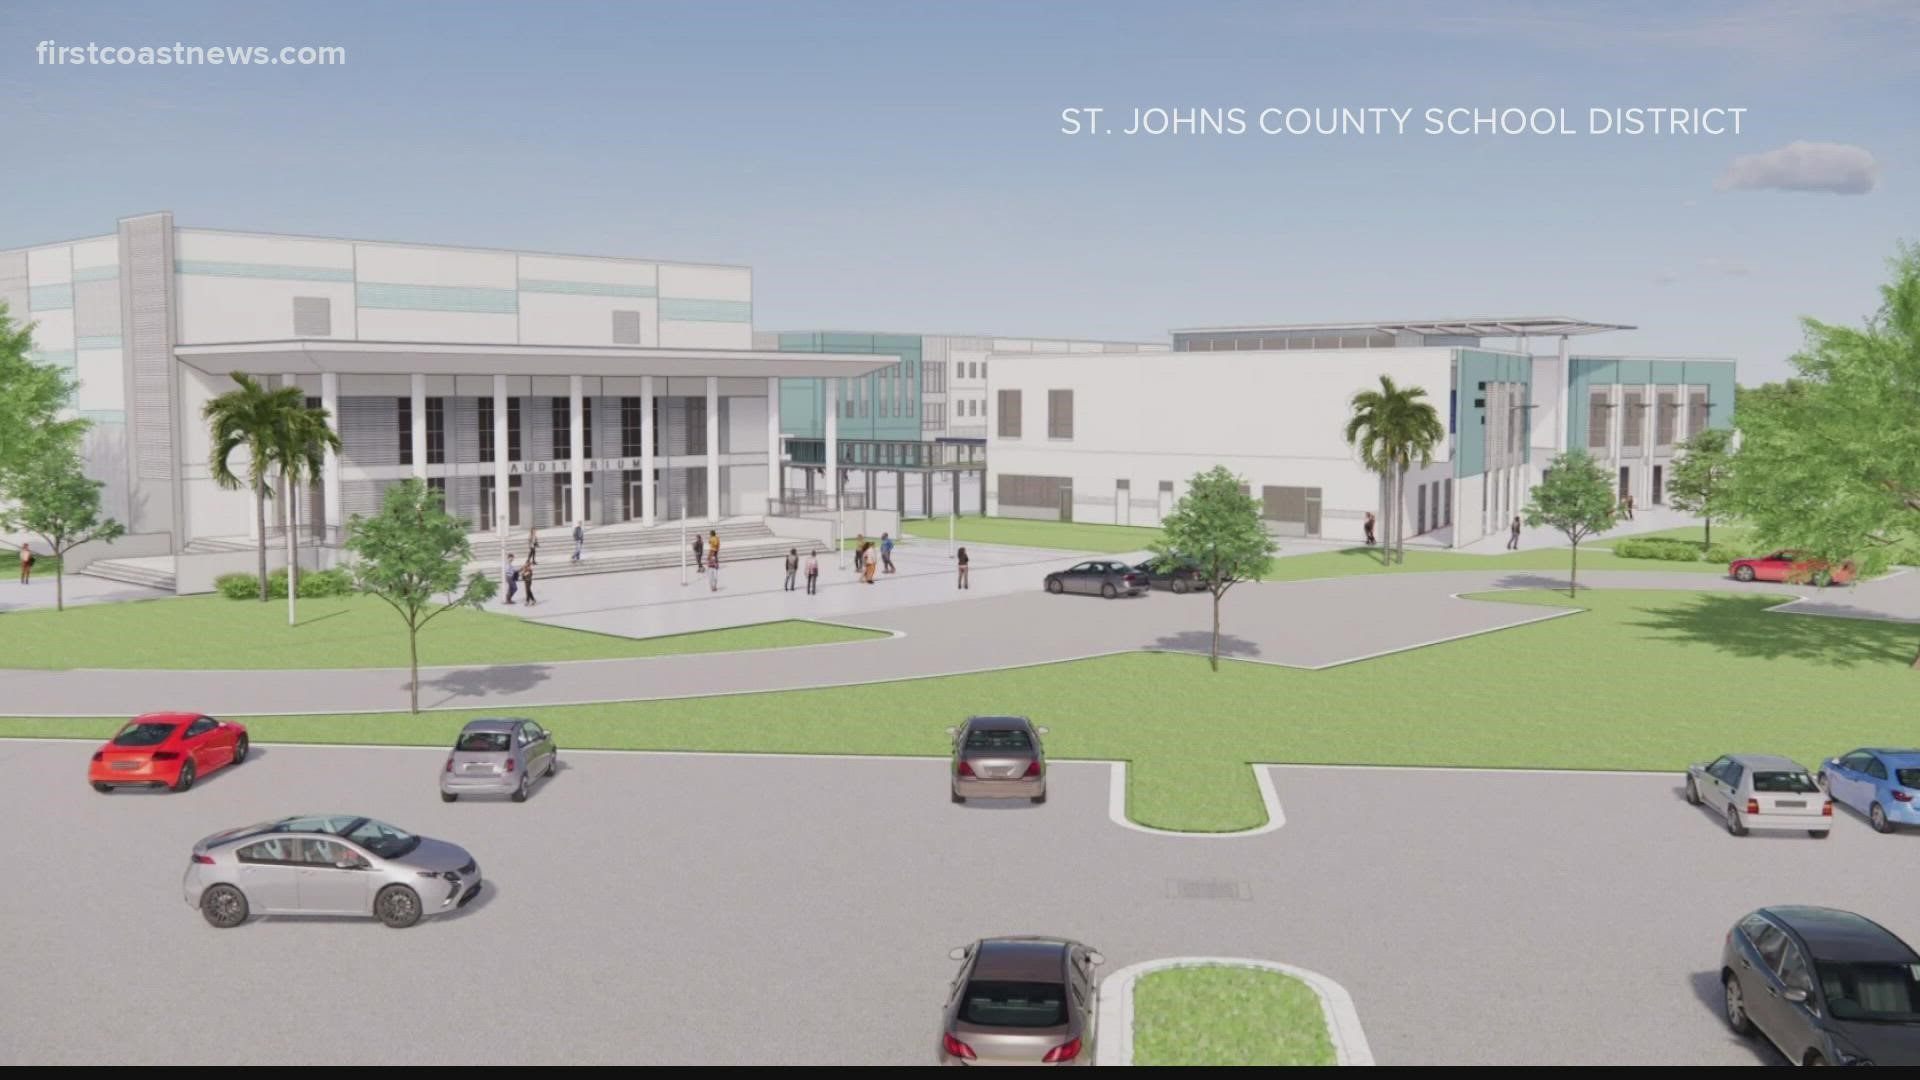 The school board approved the name Beachside High School by a vote of 3-2.